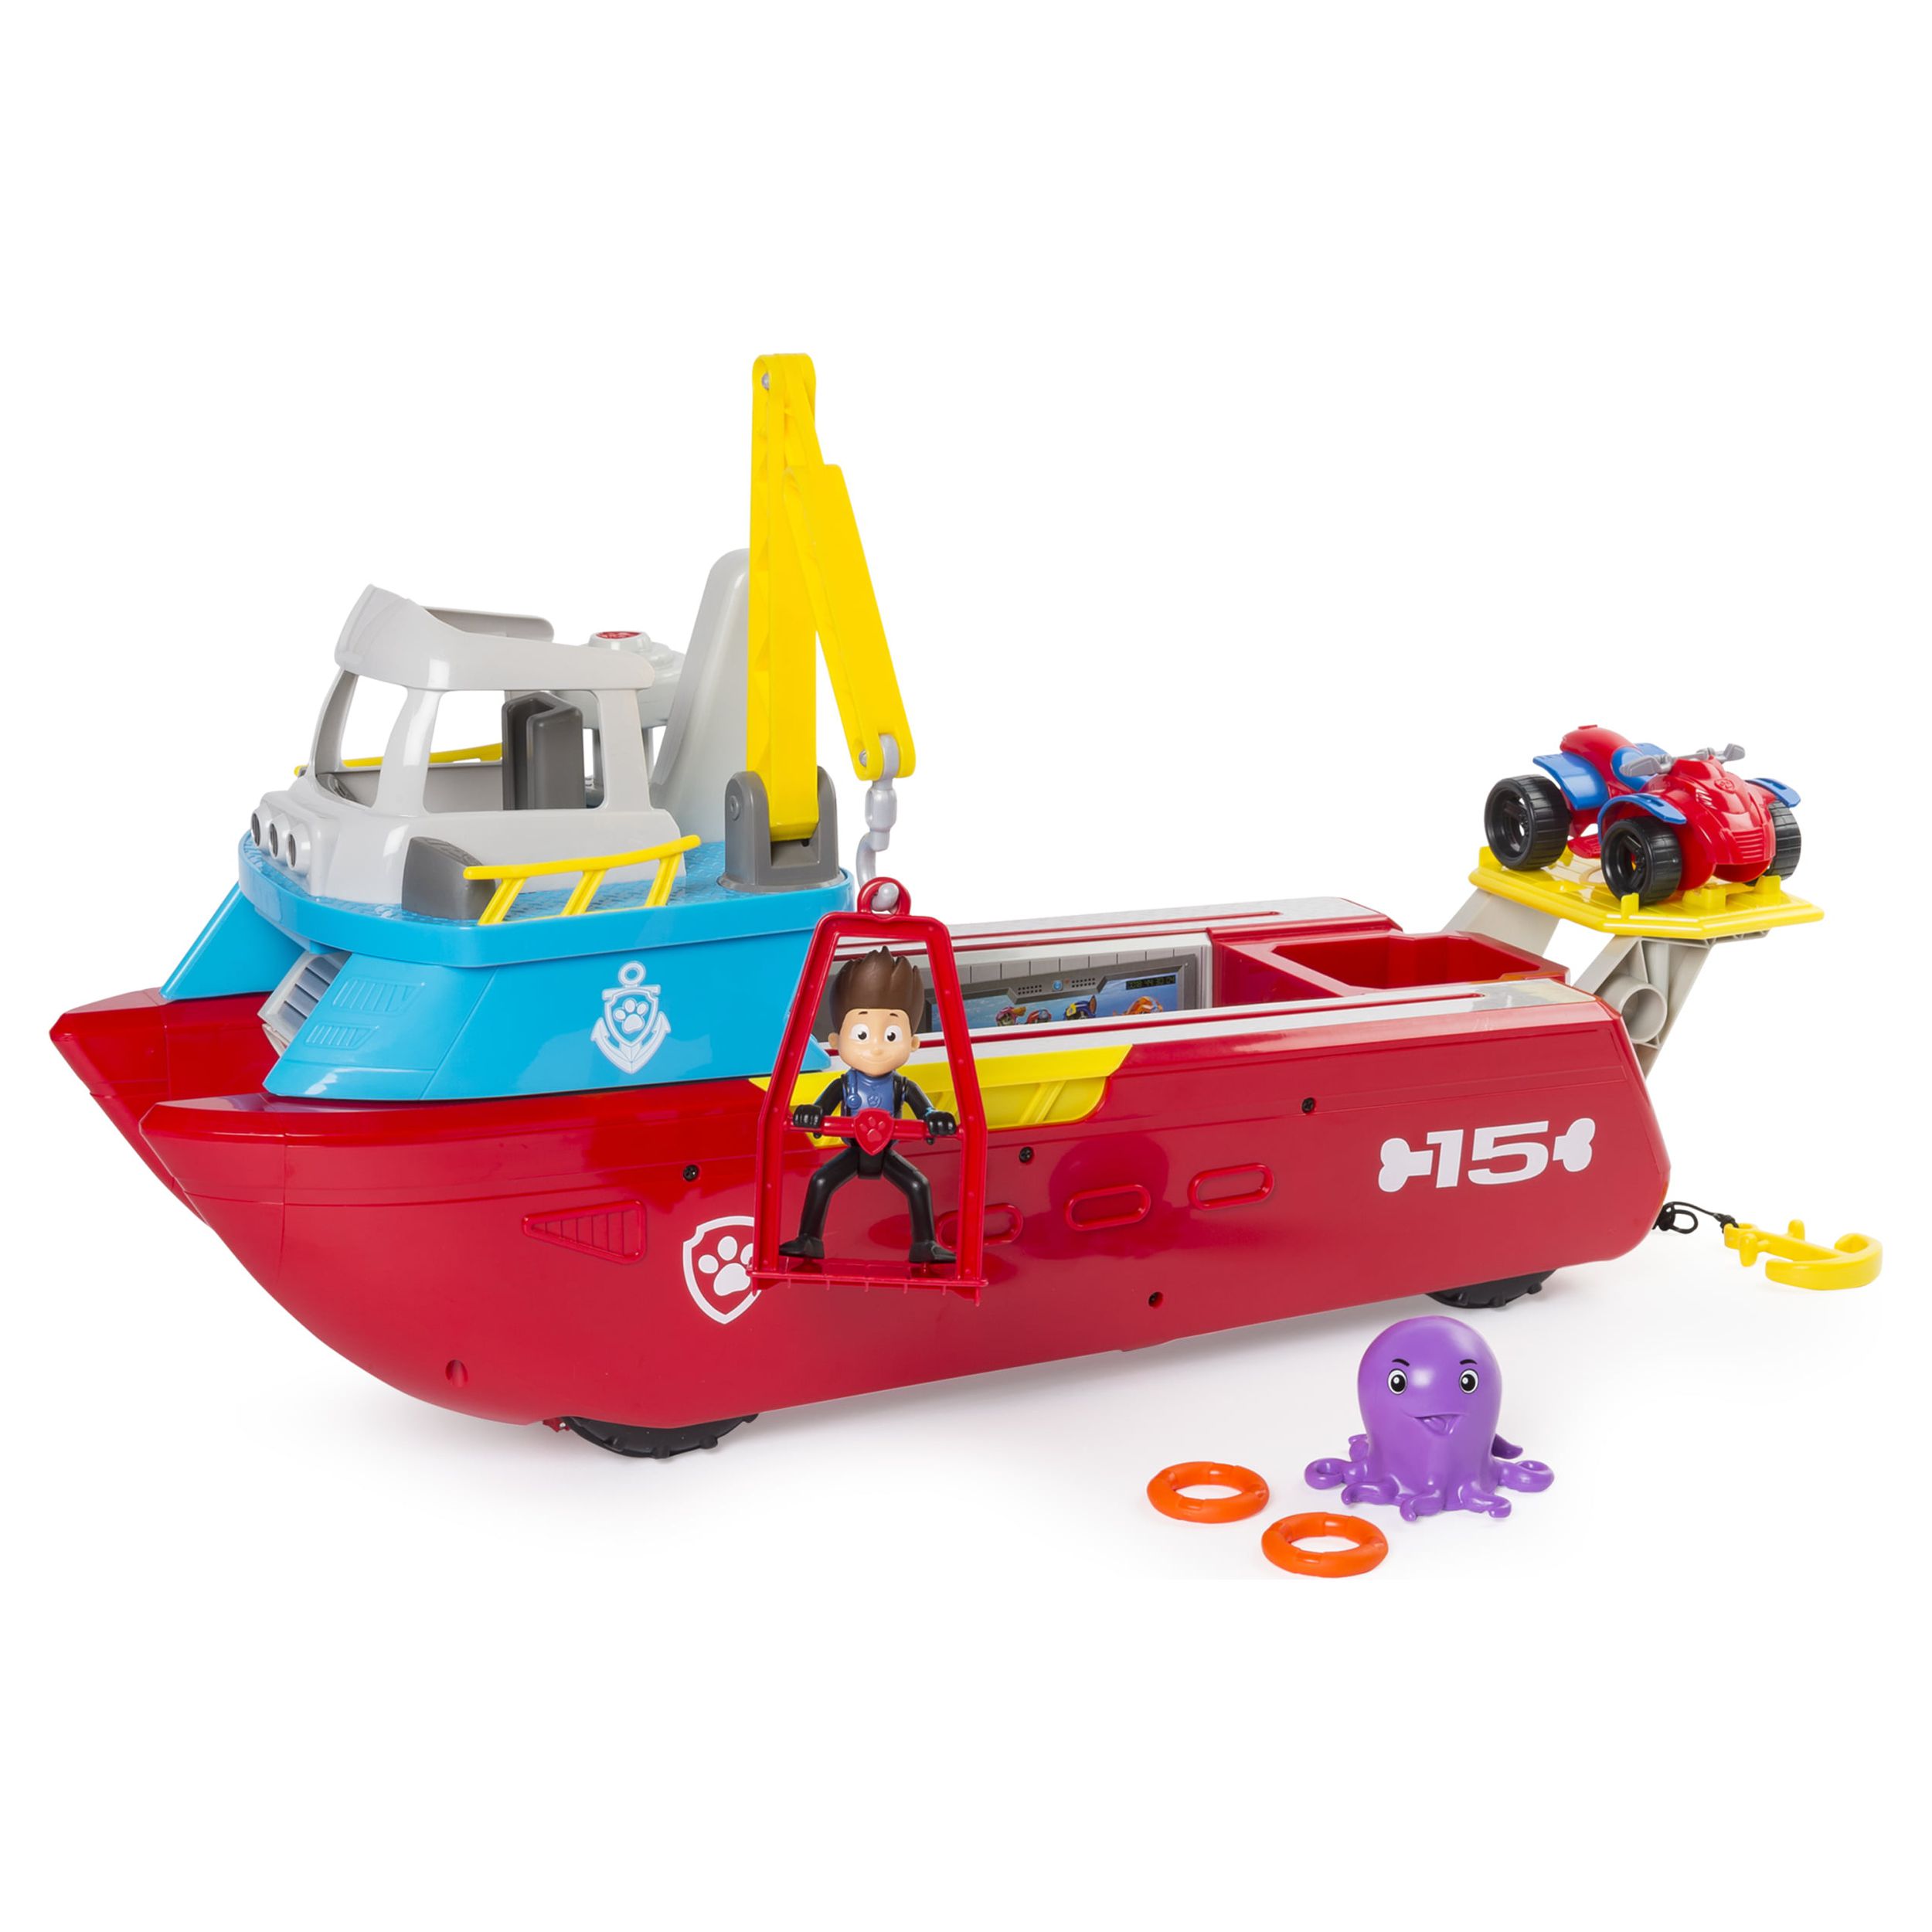 Paw Patrol Sea Patrol - Sea Patroller Transforming Vehicle with Lights and Sounds - image 3 of 14